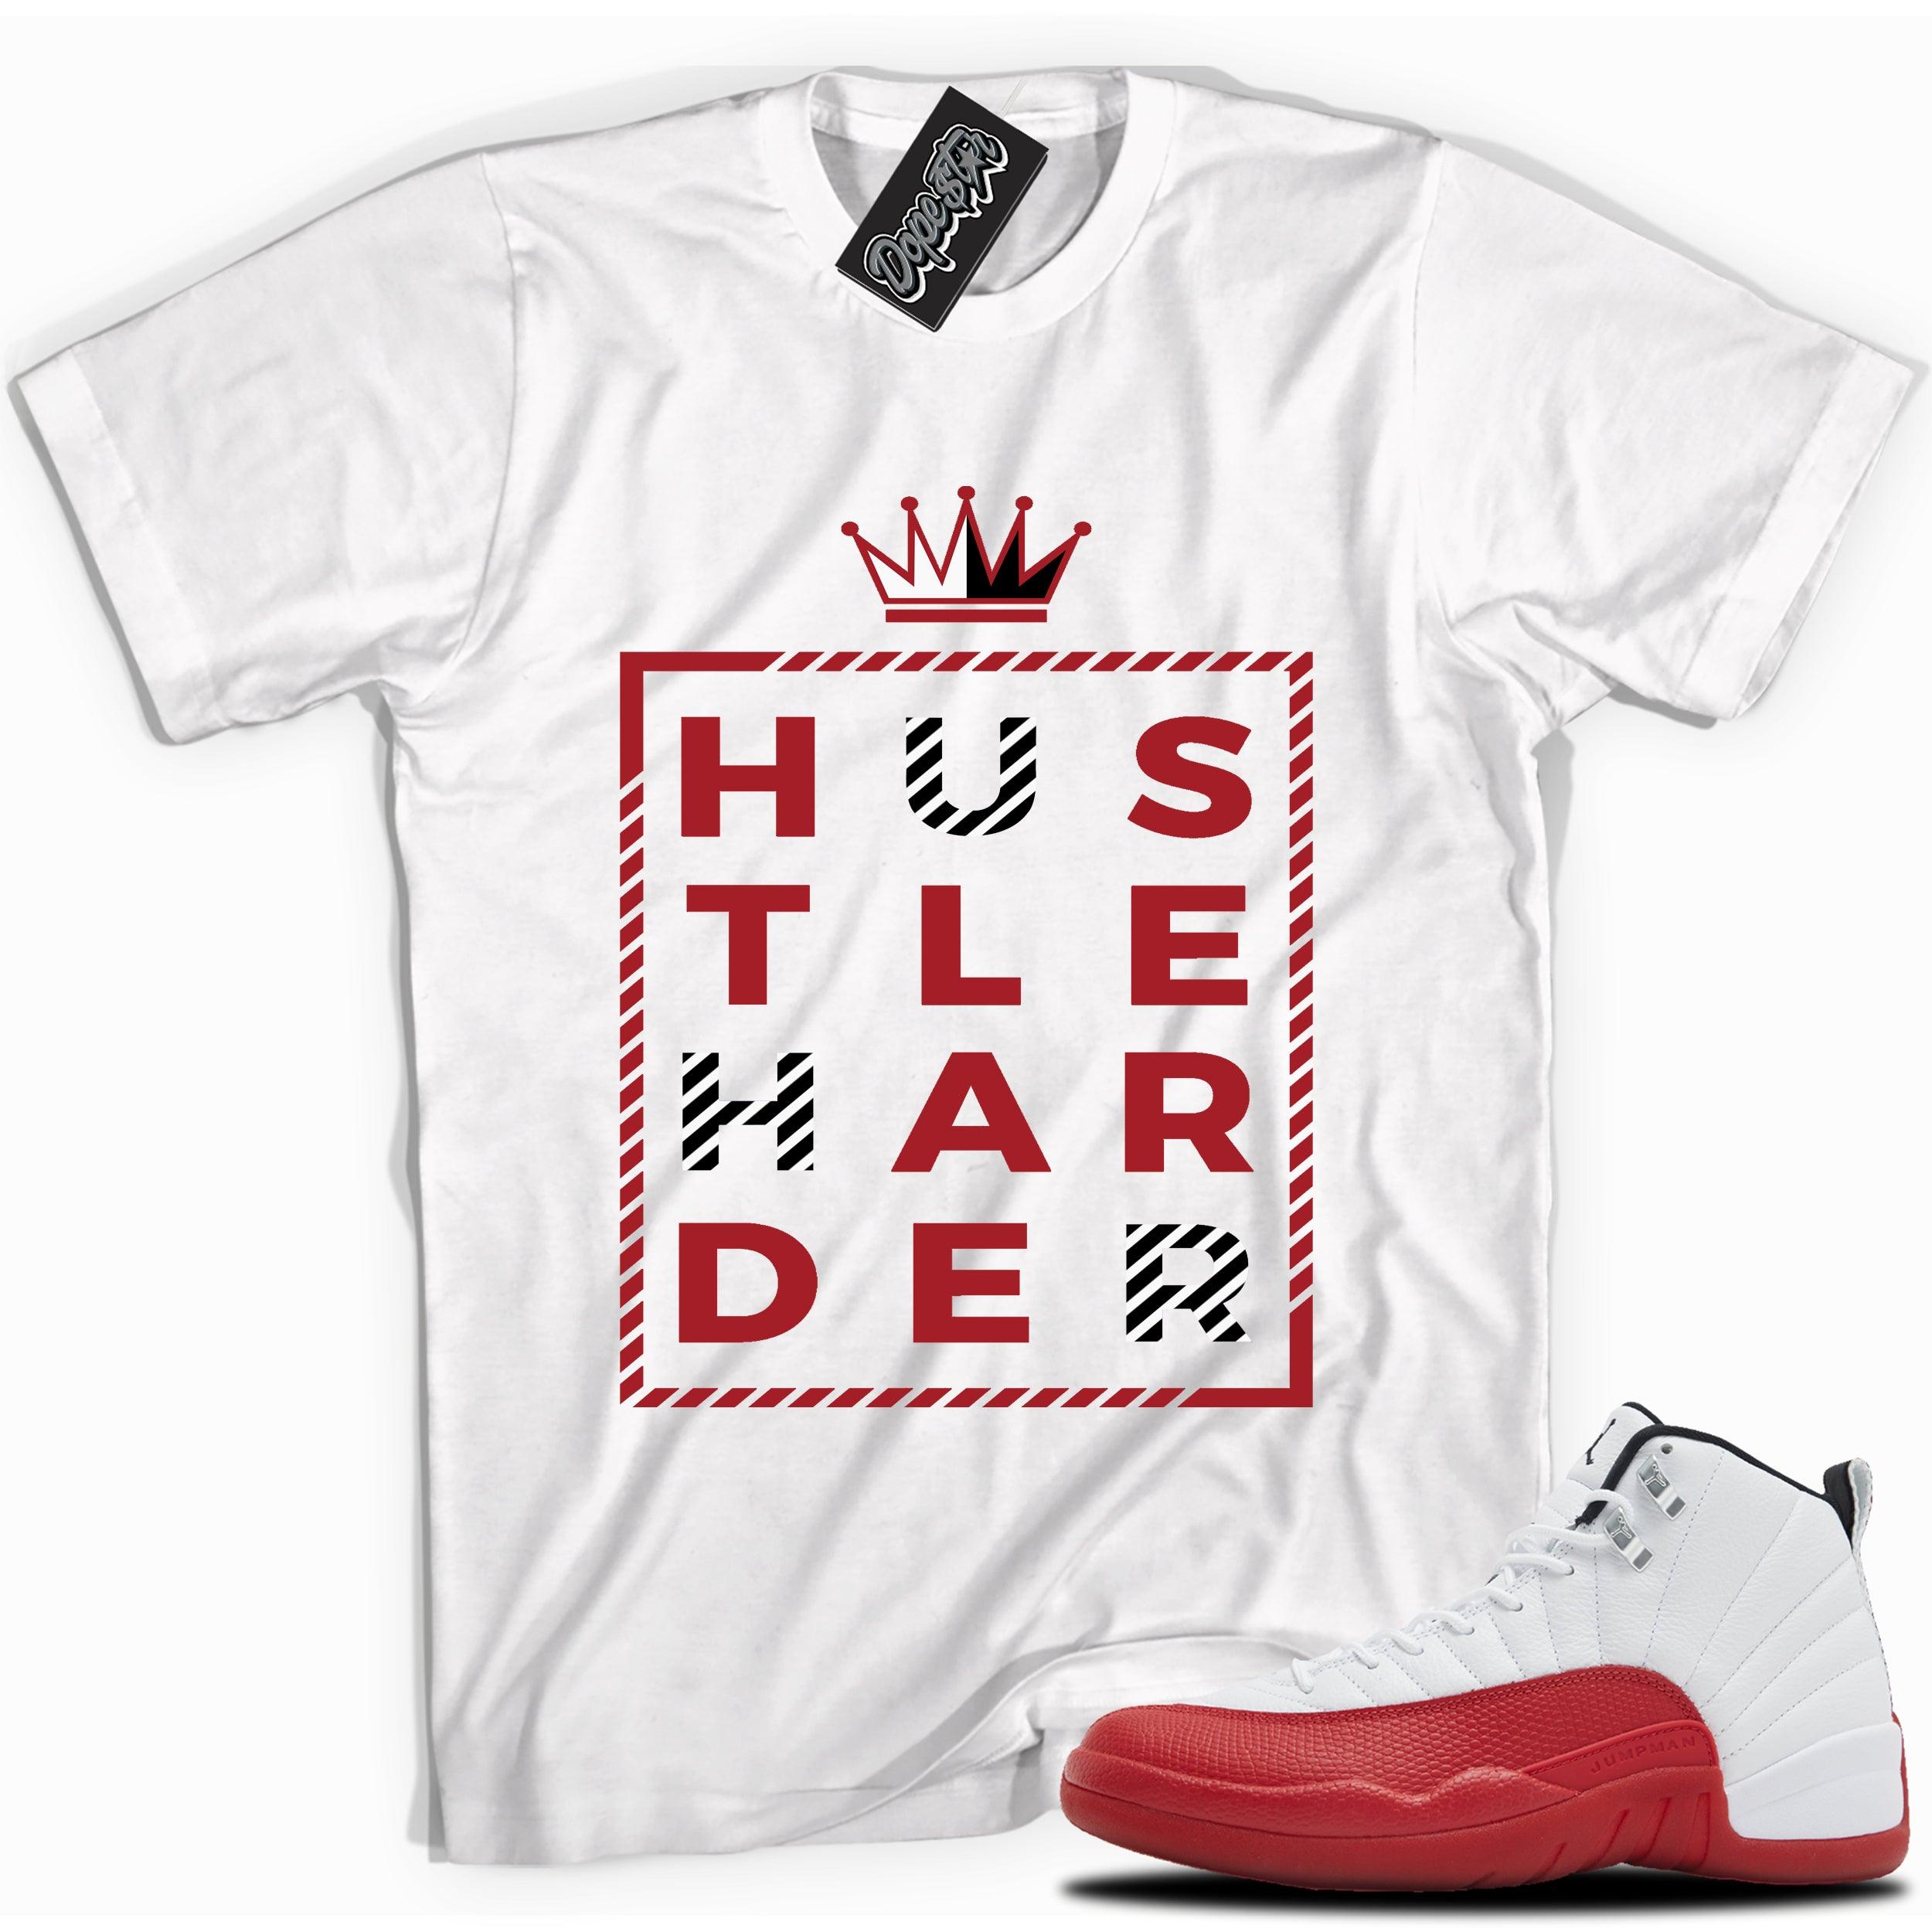 Cool White graphic tee with “ HUSTLE HARDER ” print, that perfectly matches Air Jordan 12 Retro Cherry Red 2023 red and white sneakers 